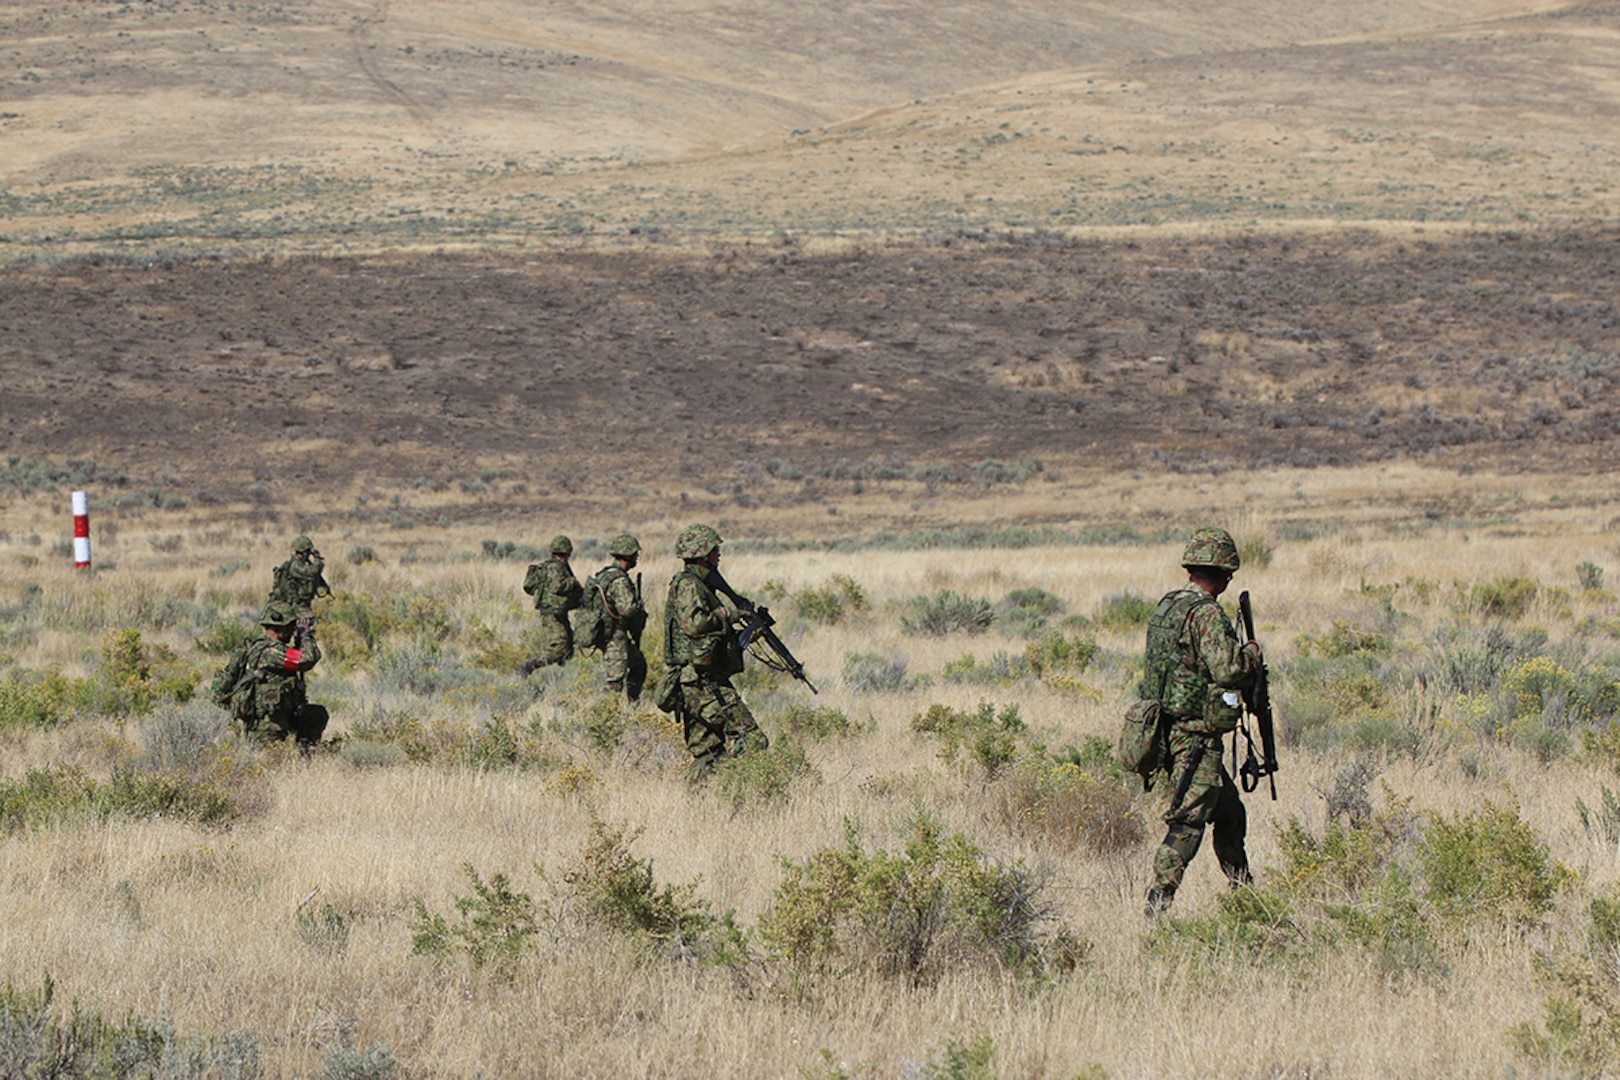 Soldiers of the Japan Ground Self-Defense Force participate in live fire exercise during Rising Thunder, Sep. 1, at the Yakima Training Center in Yakima, Washington.